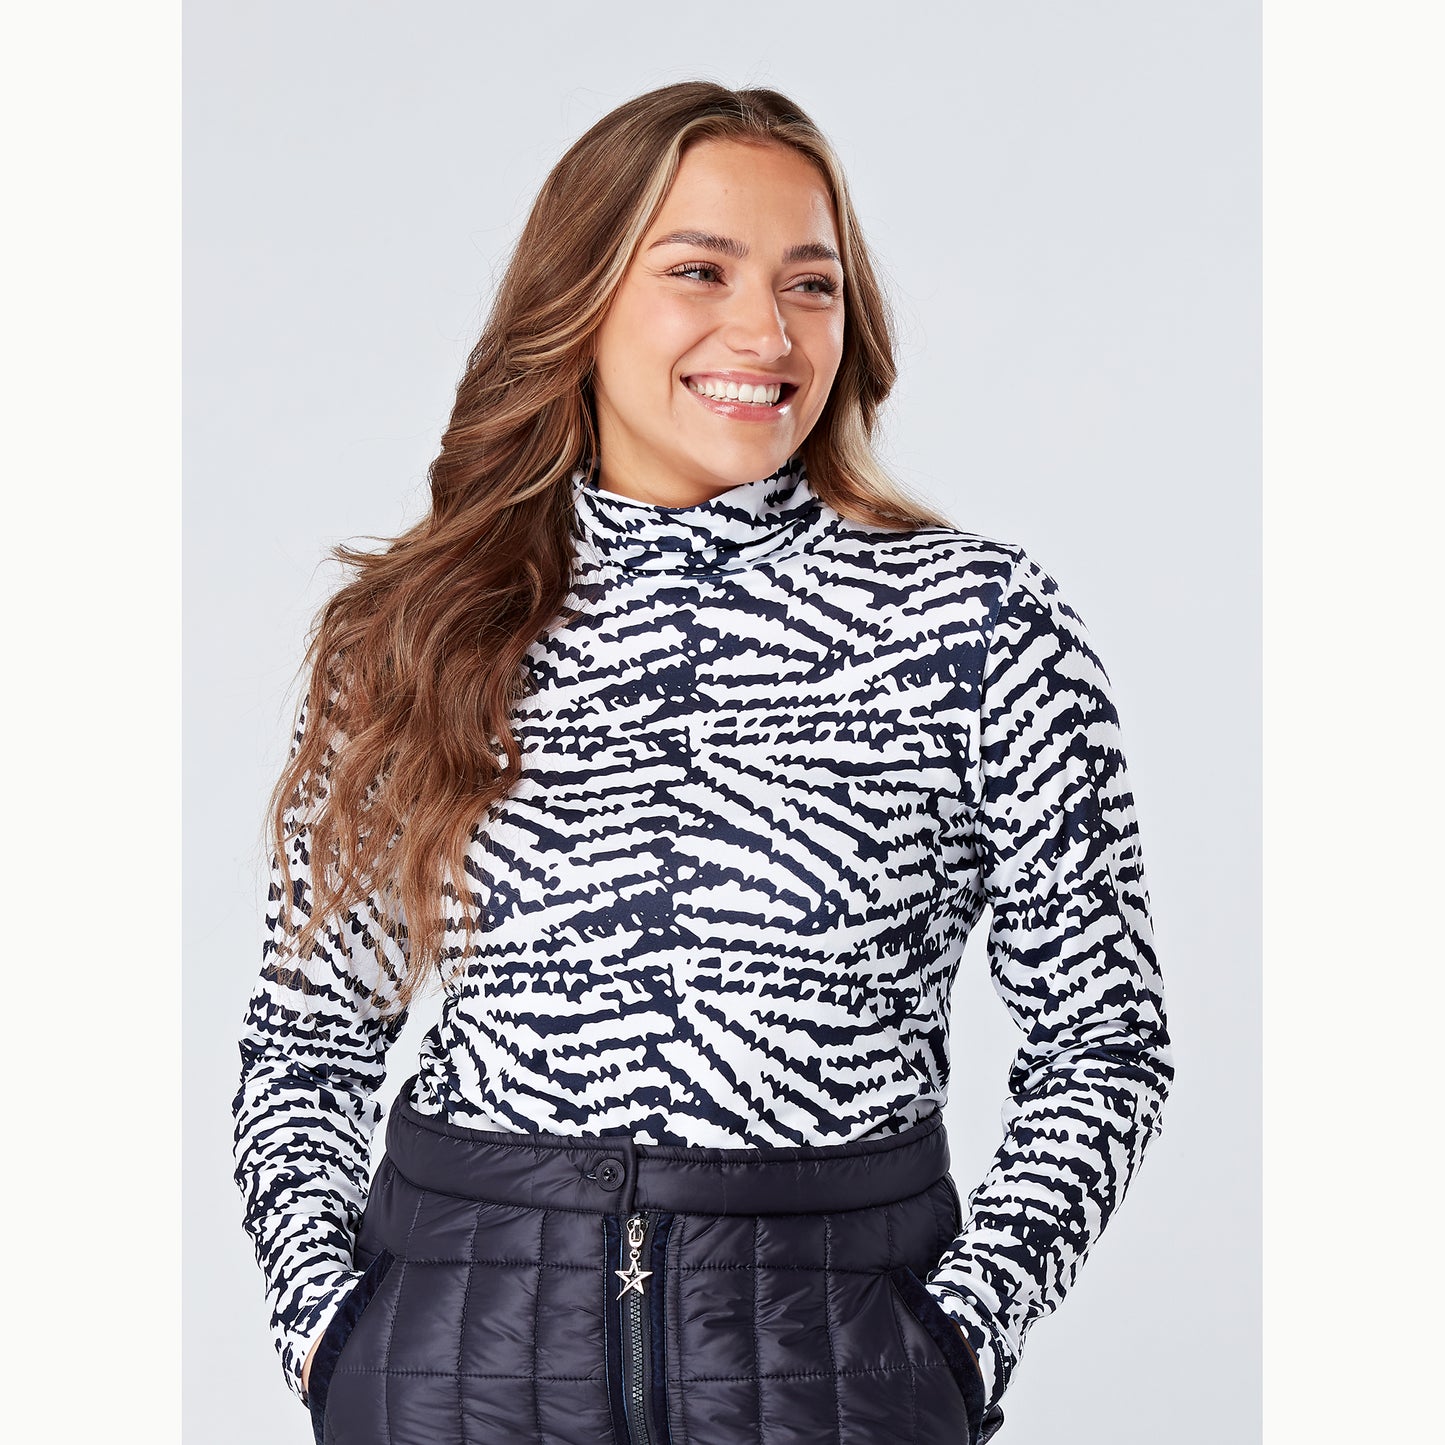 Swing Out Sister Ladies Soft-Stretch Zebra Print Golf Roll Neck Top